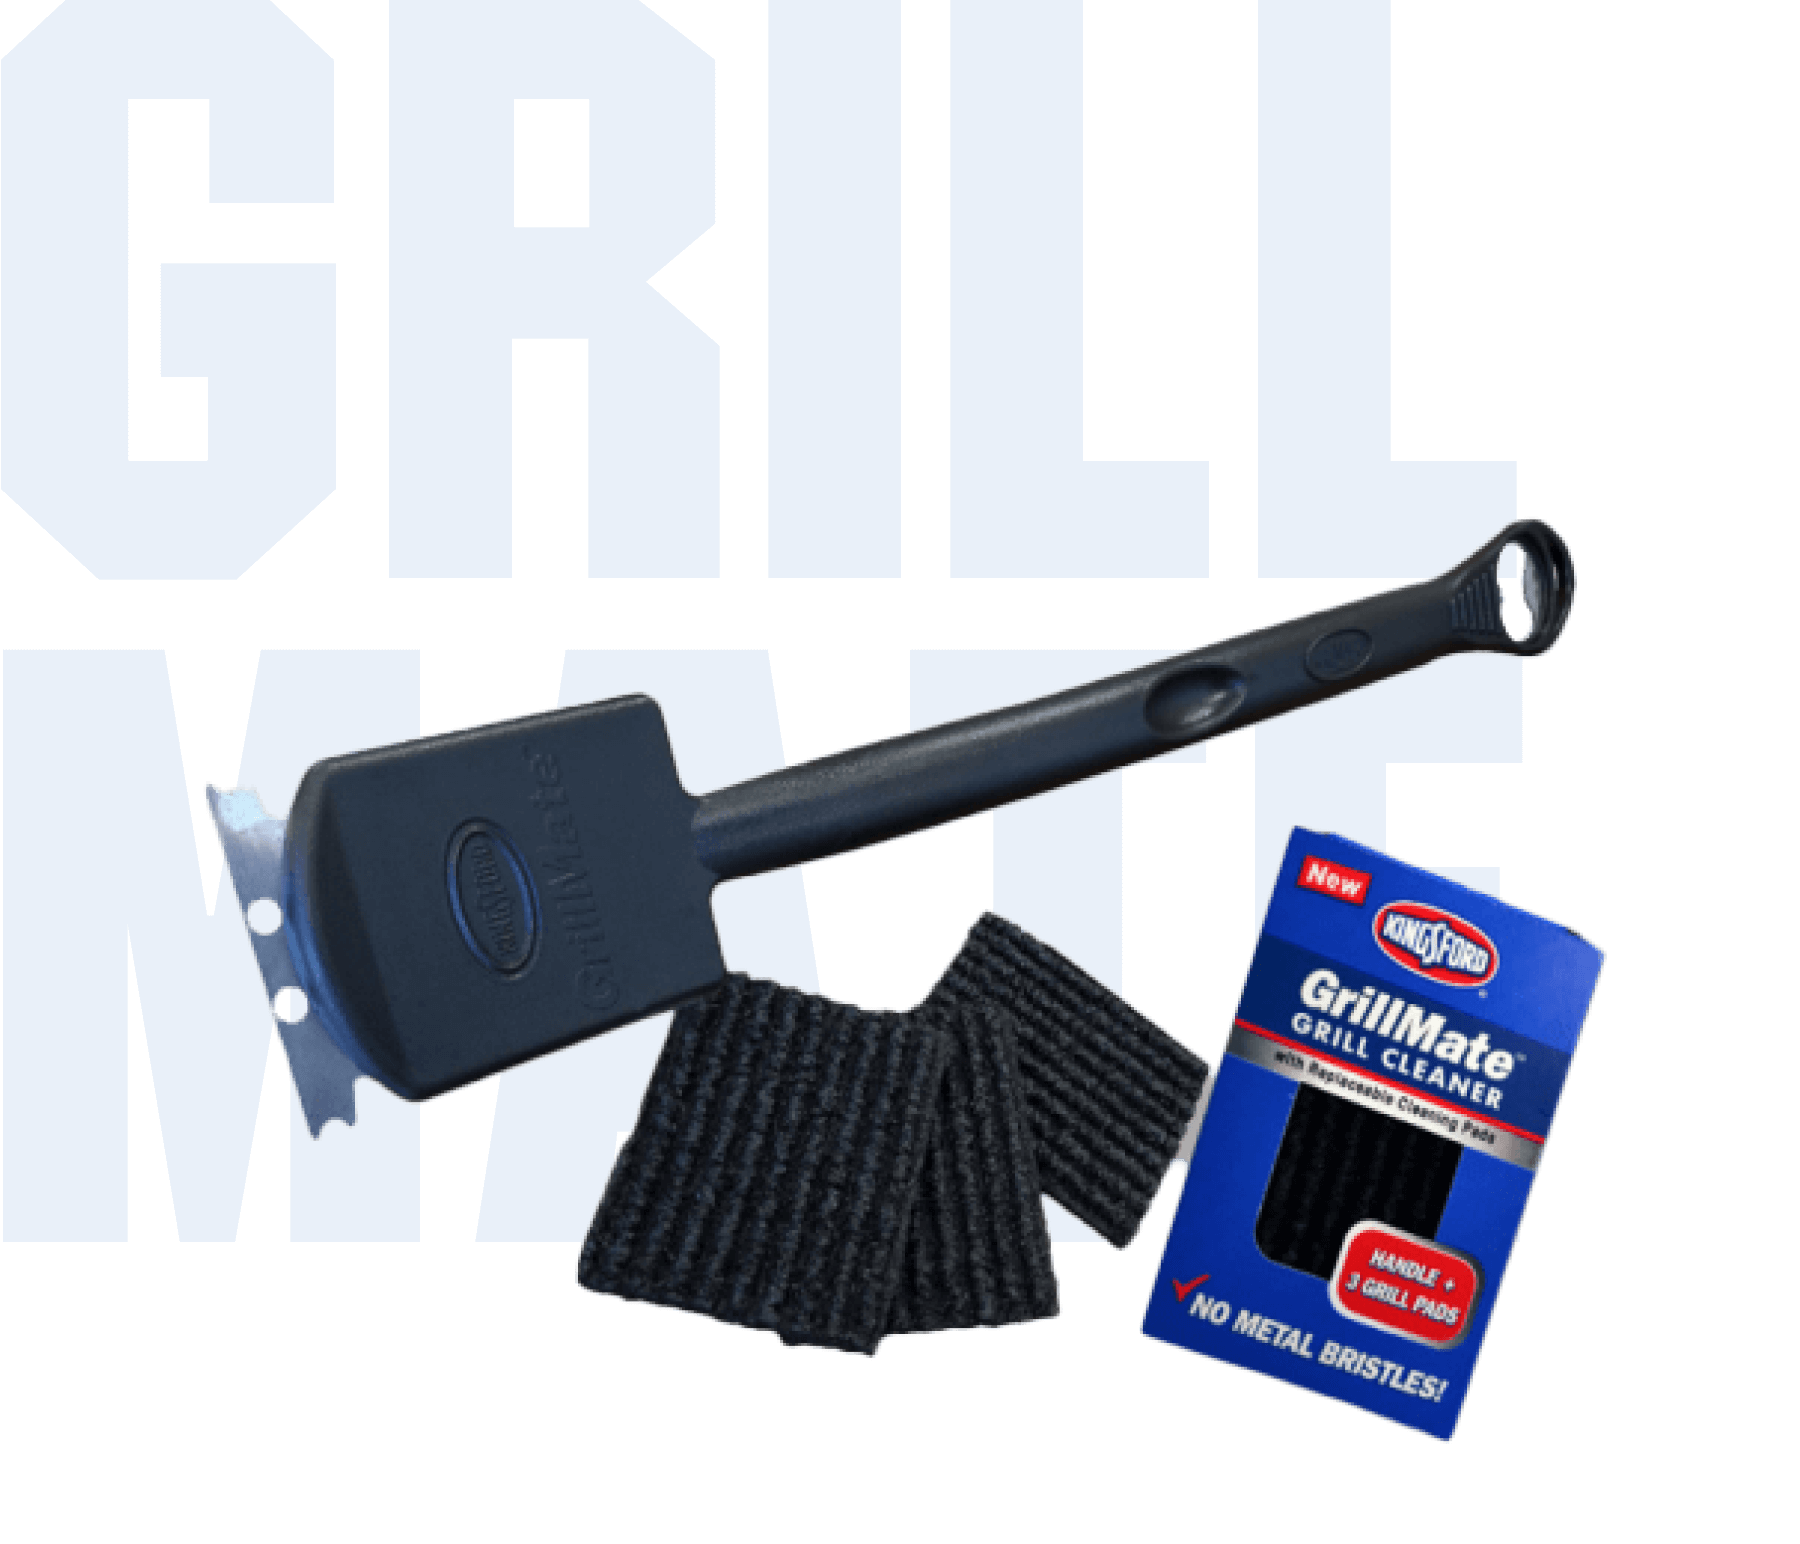 Kingsford™ Grill Cleaner